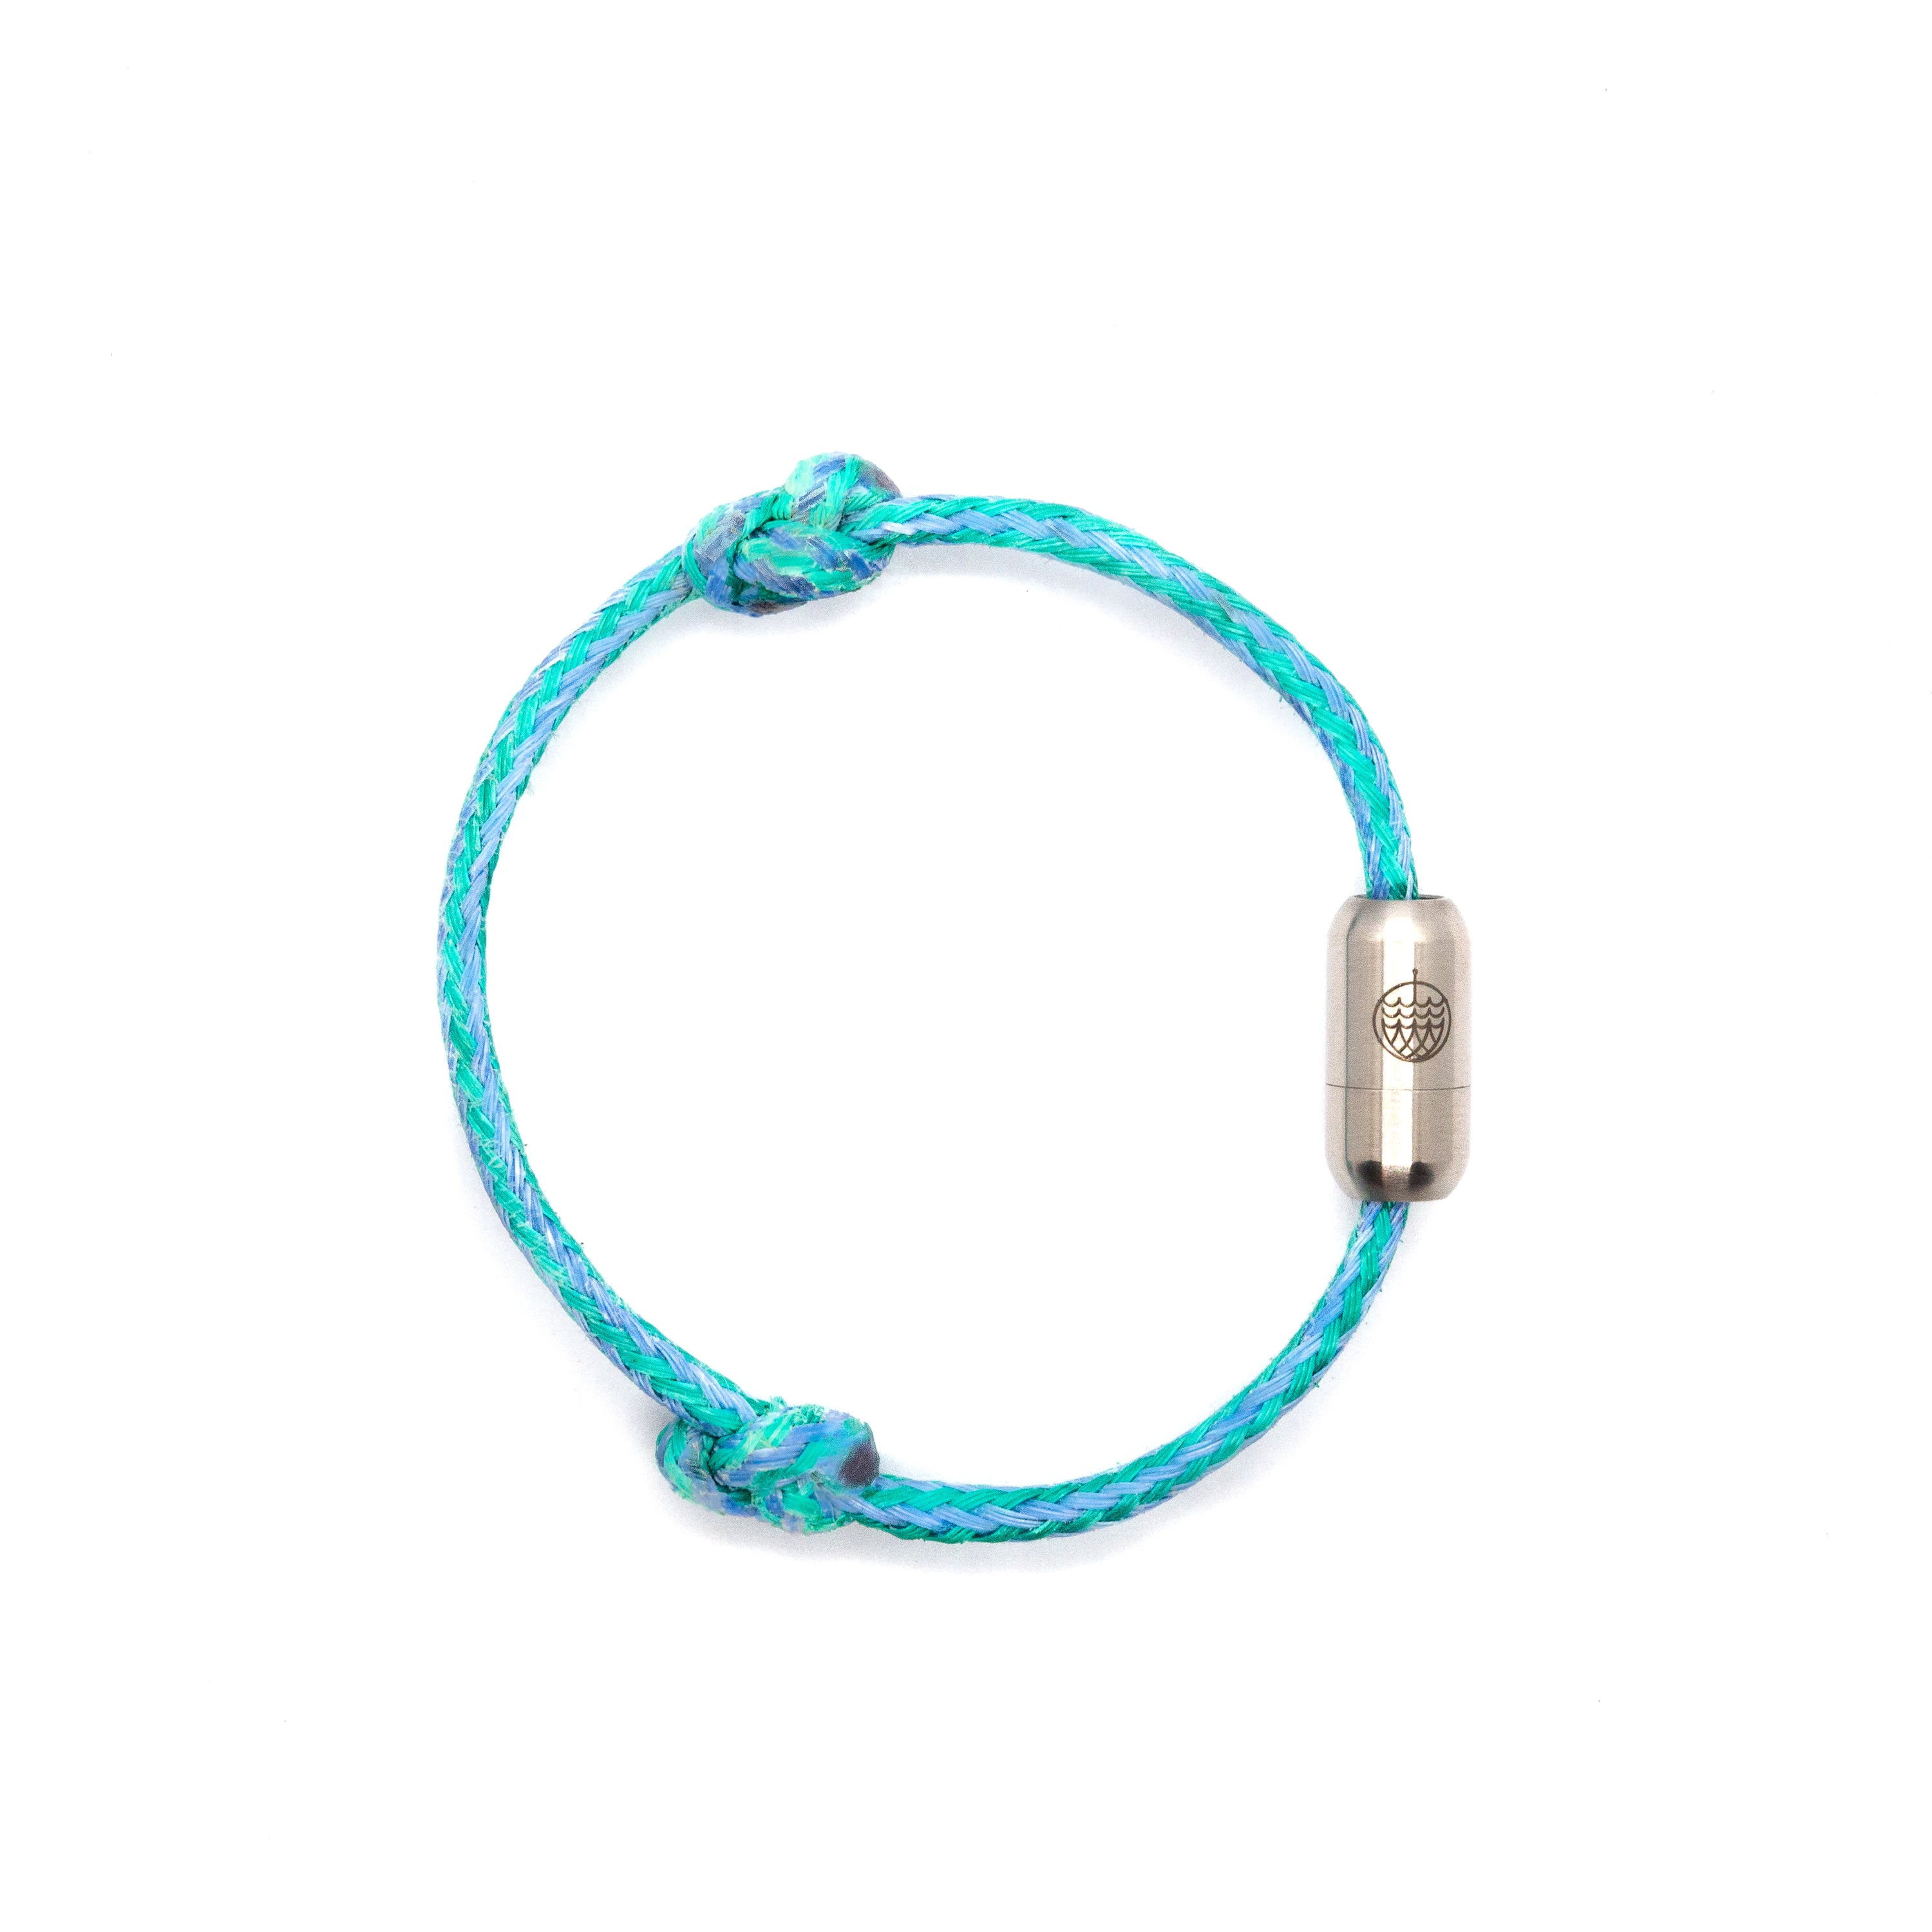 Bracelet in color aqua and light blue with a silver clasp by Bracenet